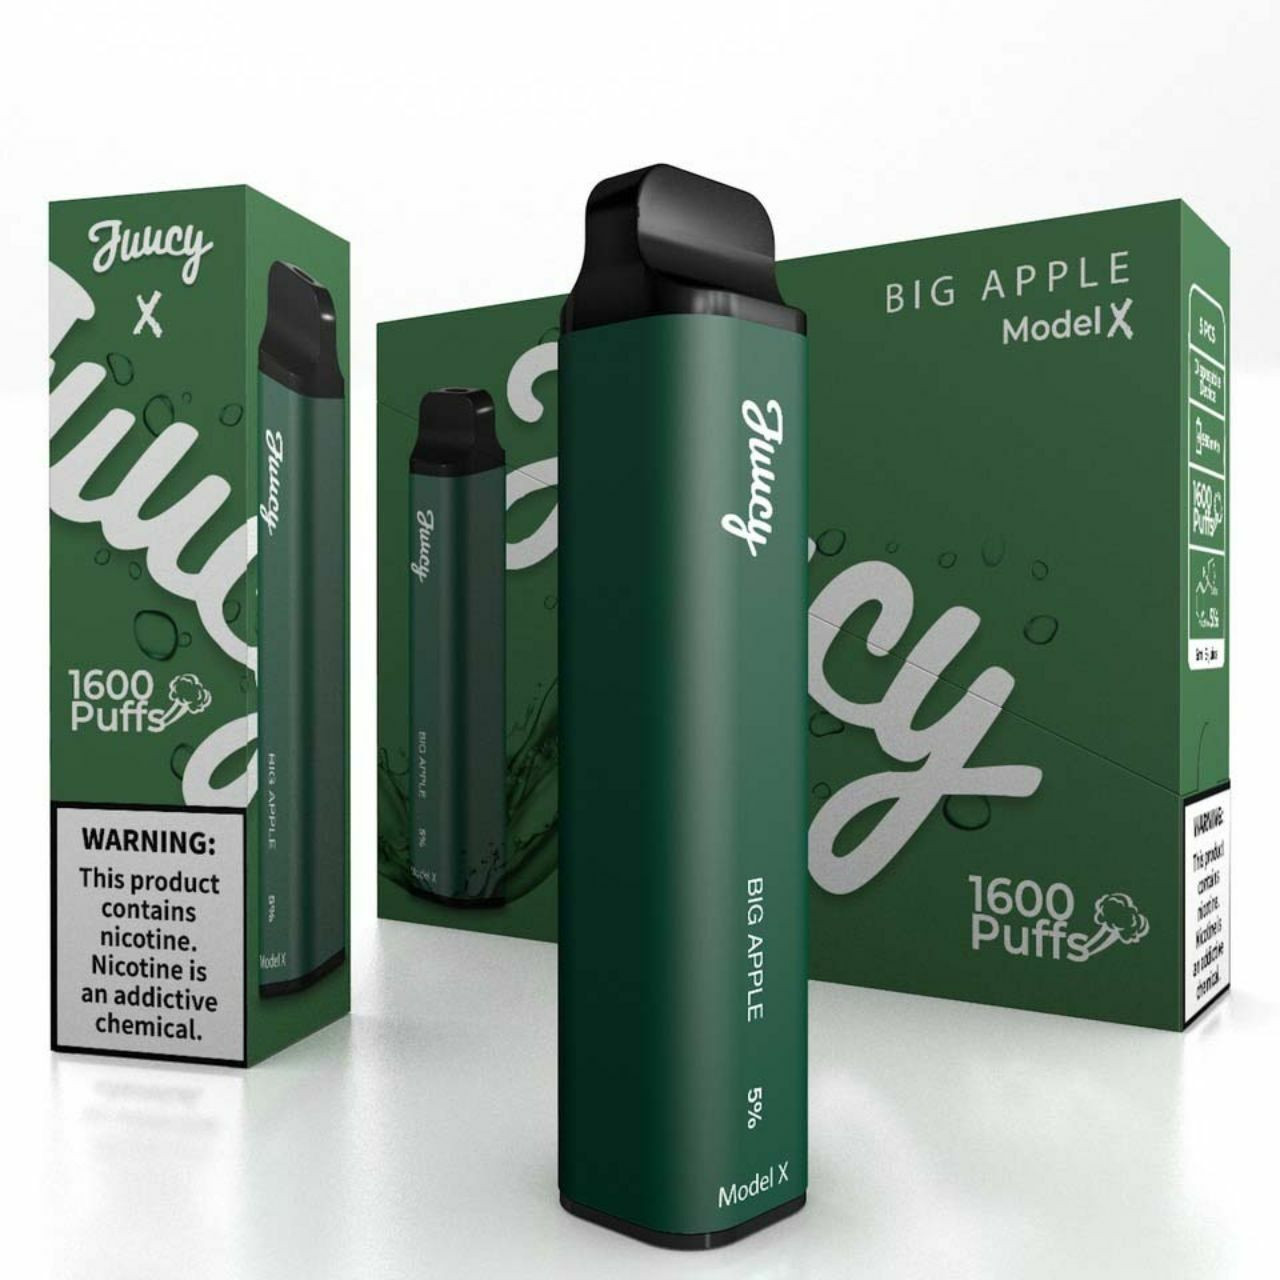 Juucy Model S Big Apple Review: A Crisp and Juicy Vaping Experience